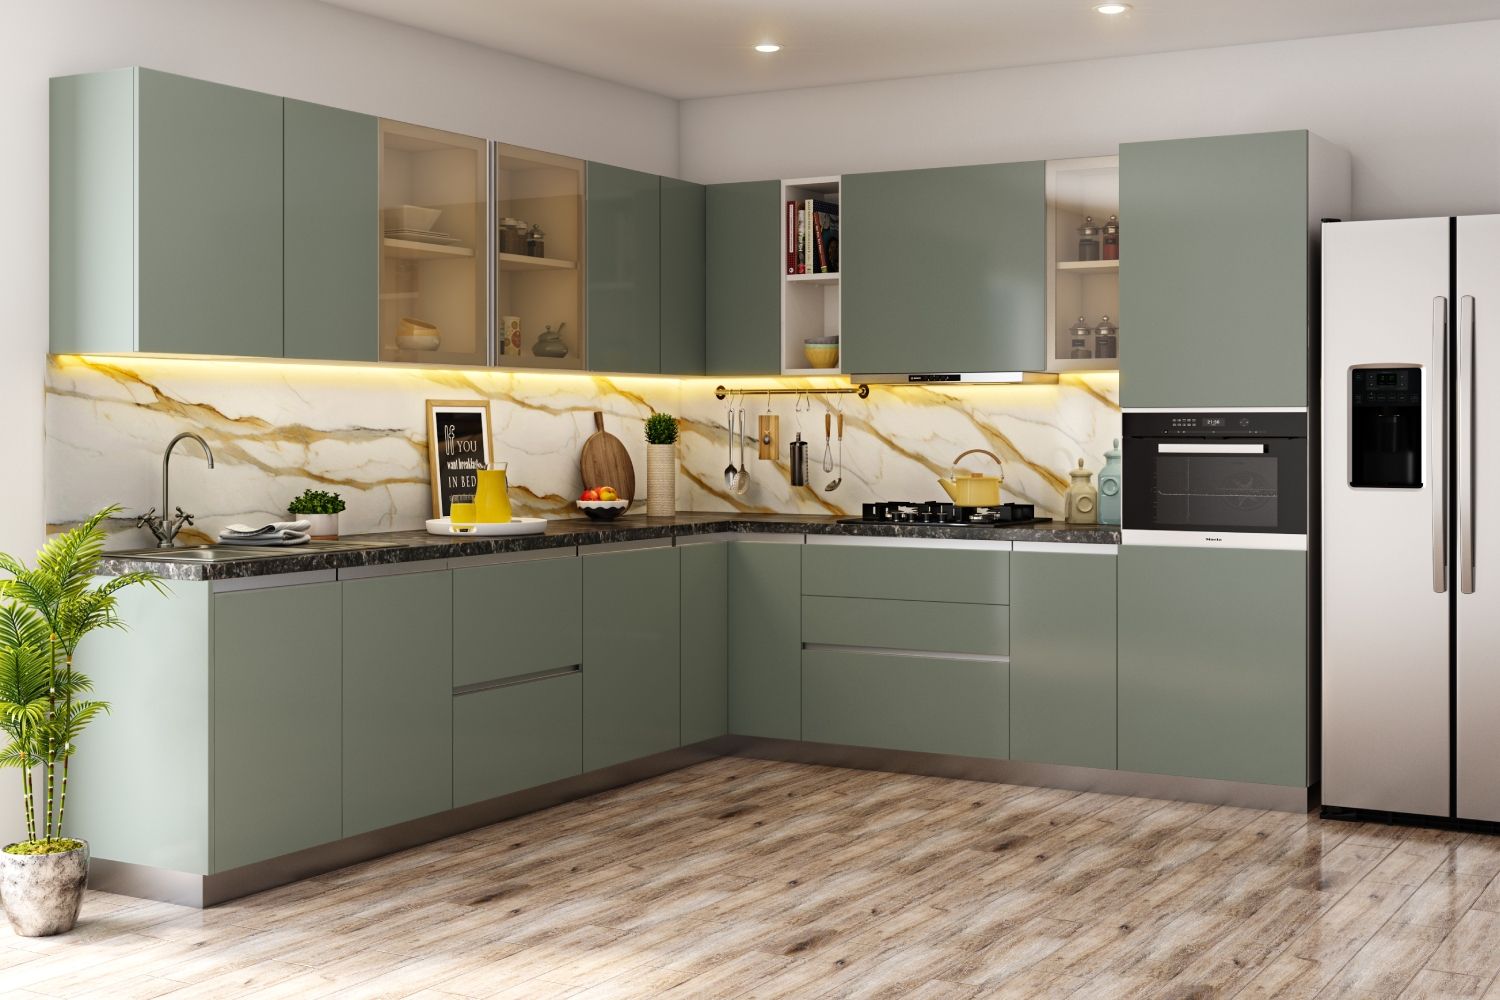 Contemporary L Shaped Modular Kitchen Design With Pastel Green Cabinets